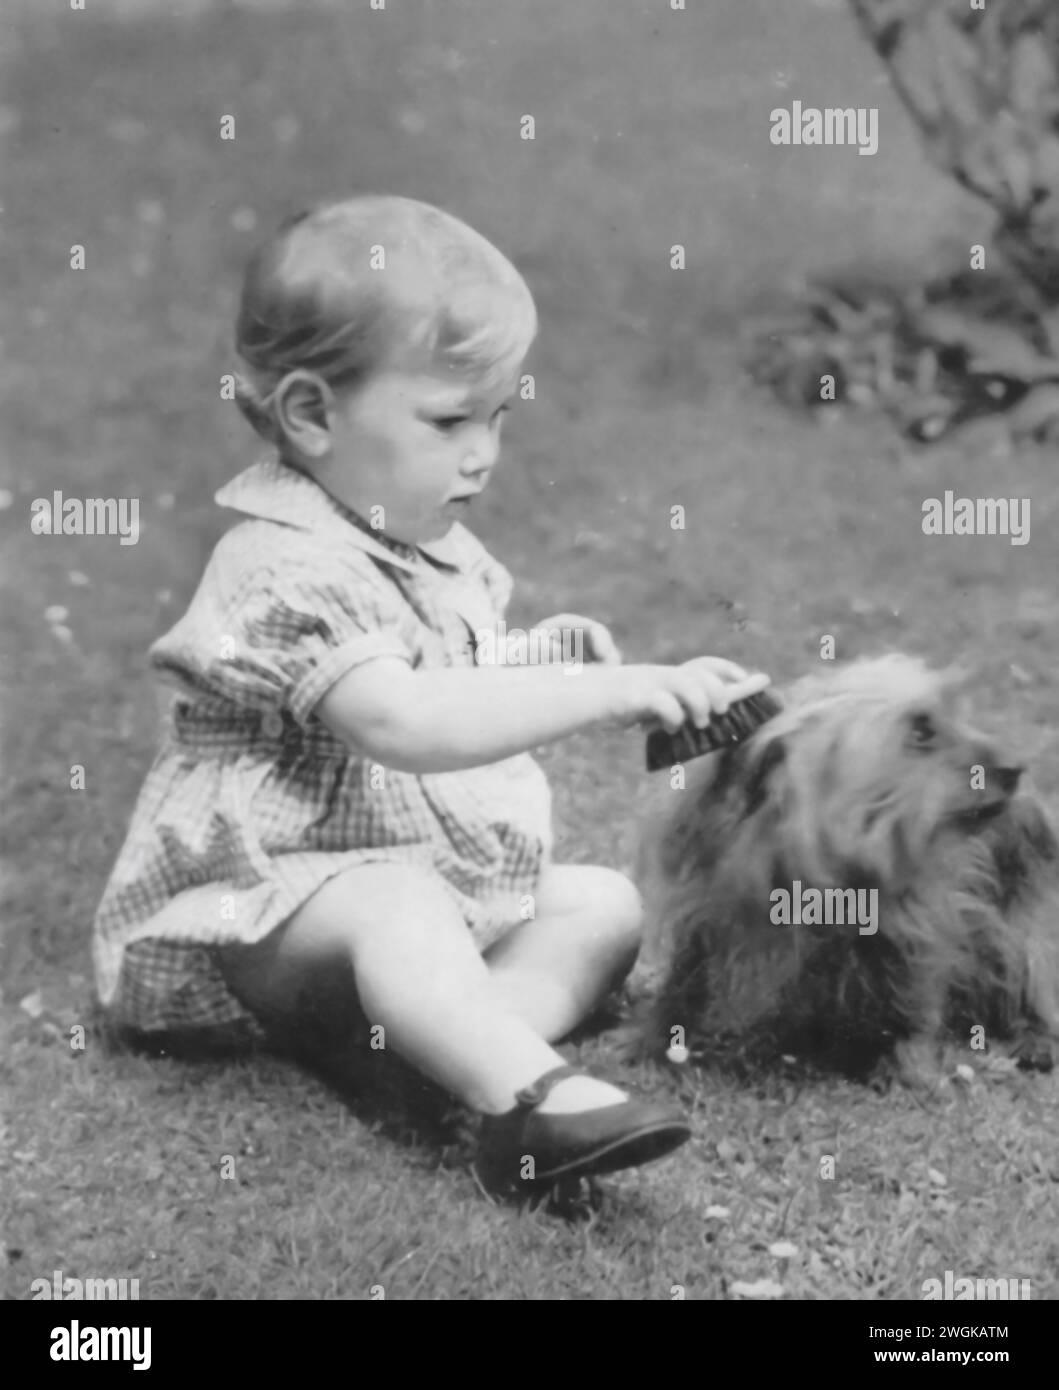 Photograph of a young William of Gloucester grooming his dog Zalie, taken in 1943. William, the nephew of the reigning monarch, King George VI, and a first cousin of the future Queen Elizabeth II. This image offers a glimpse into the personal life of the young prince, during the Second World War. Stock Photo